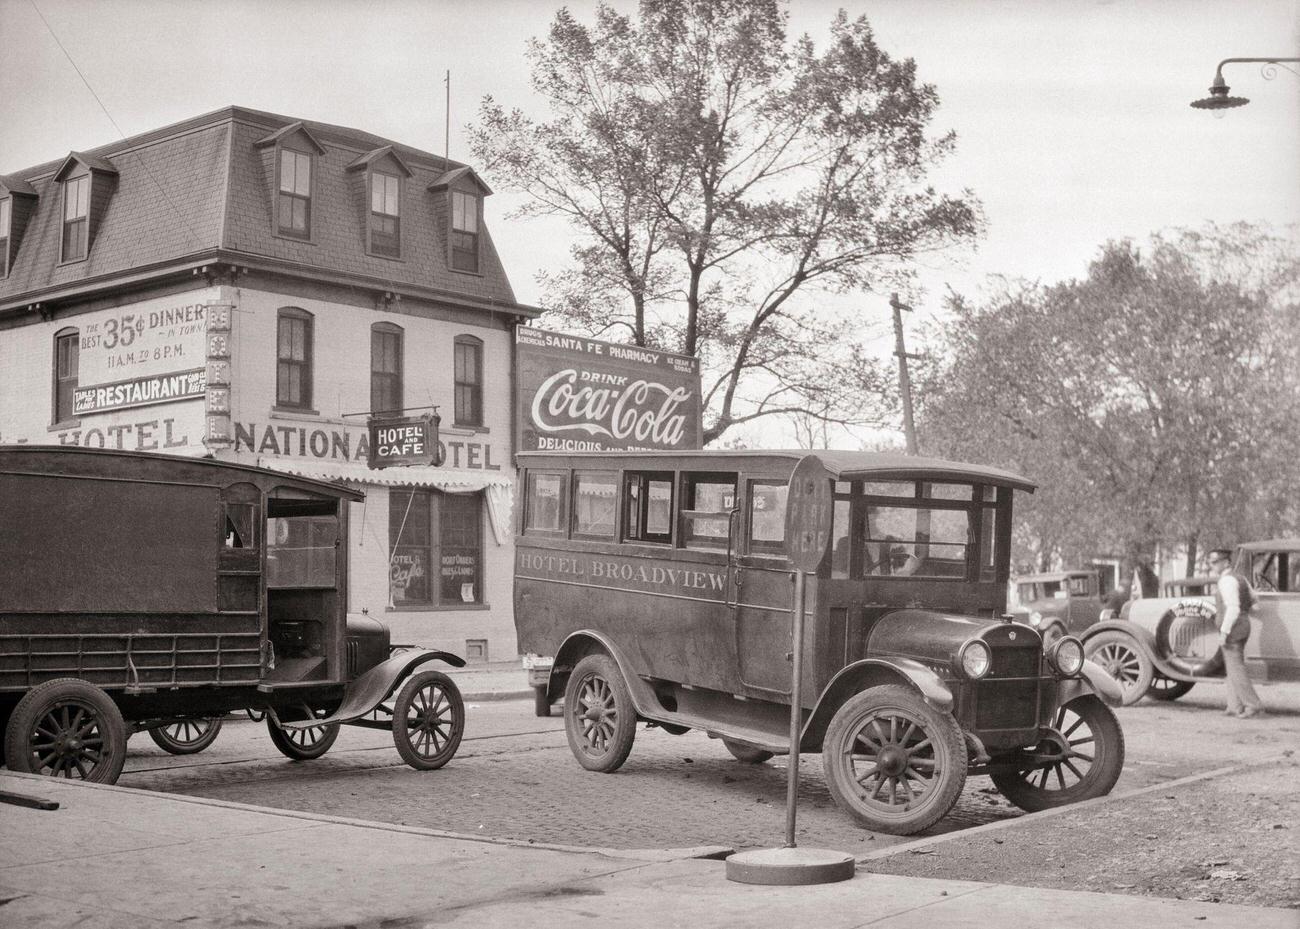 A 1920s motor bus and delivery van parked at a railway station in Emporia, Kansas, USA.